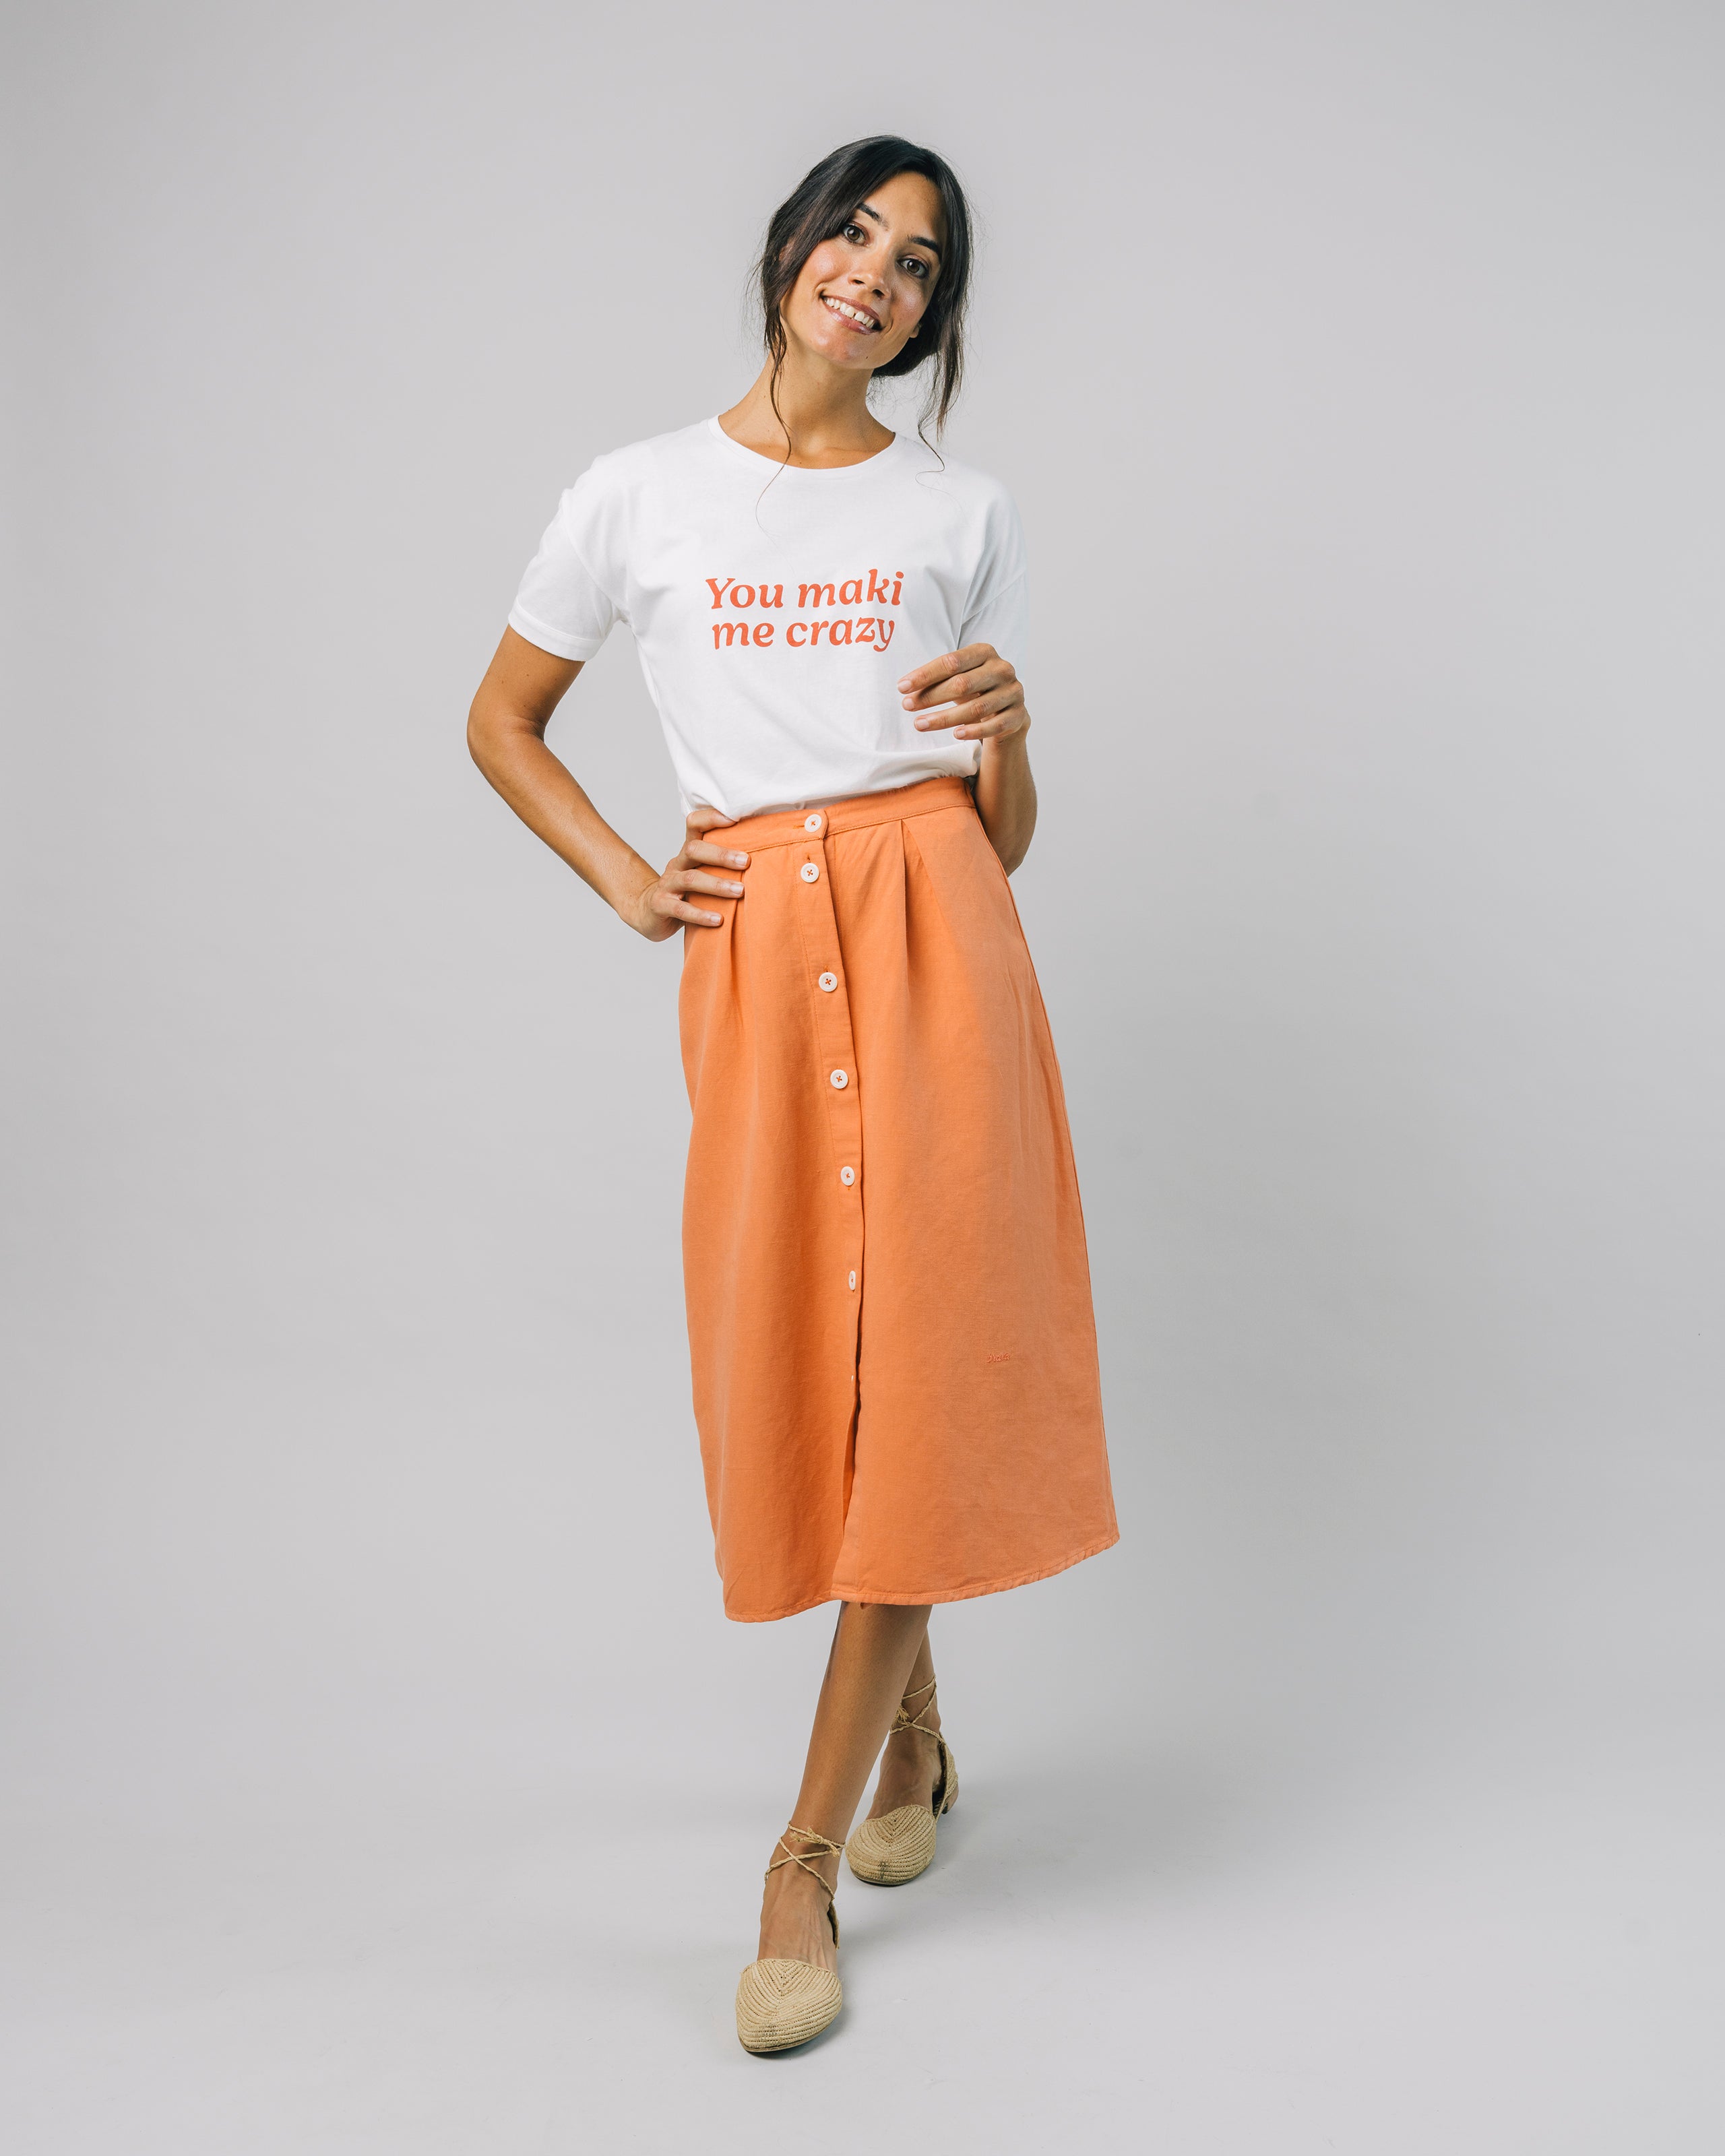 White, printed T-shirt You Maki Me Crazy made from 100% organic cotton from Brava Fabrics